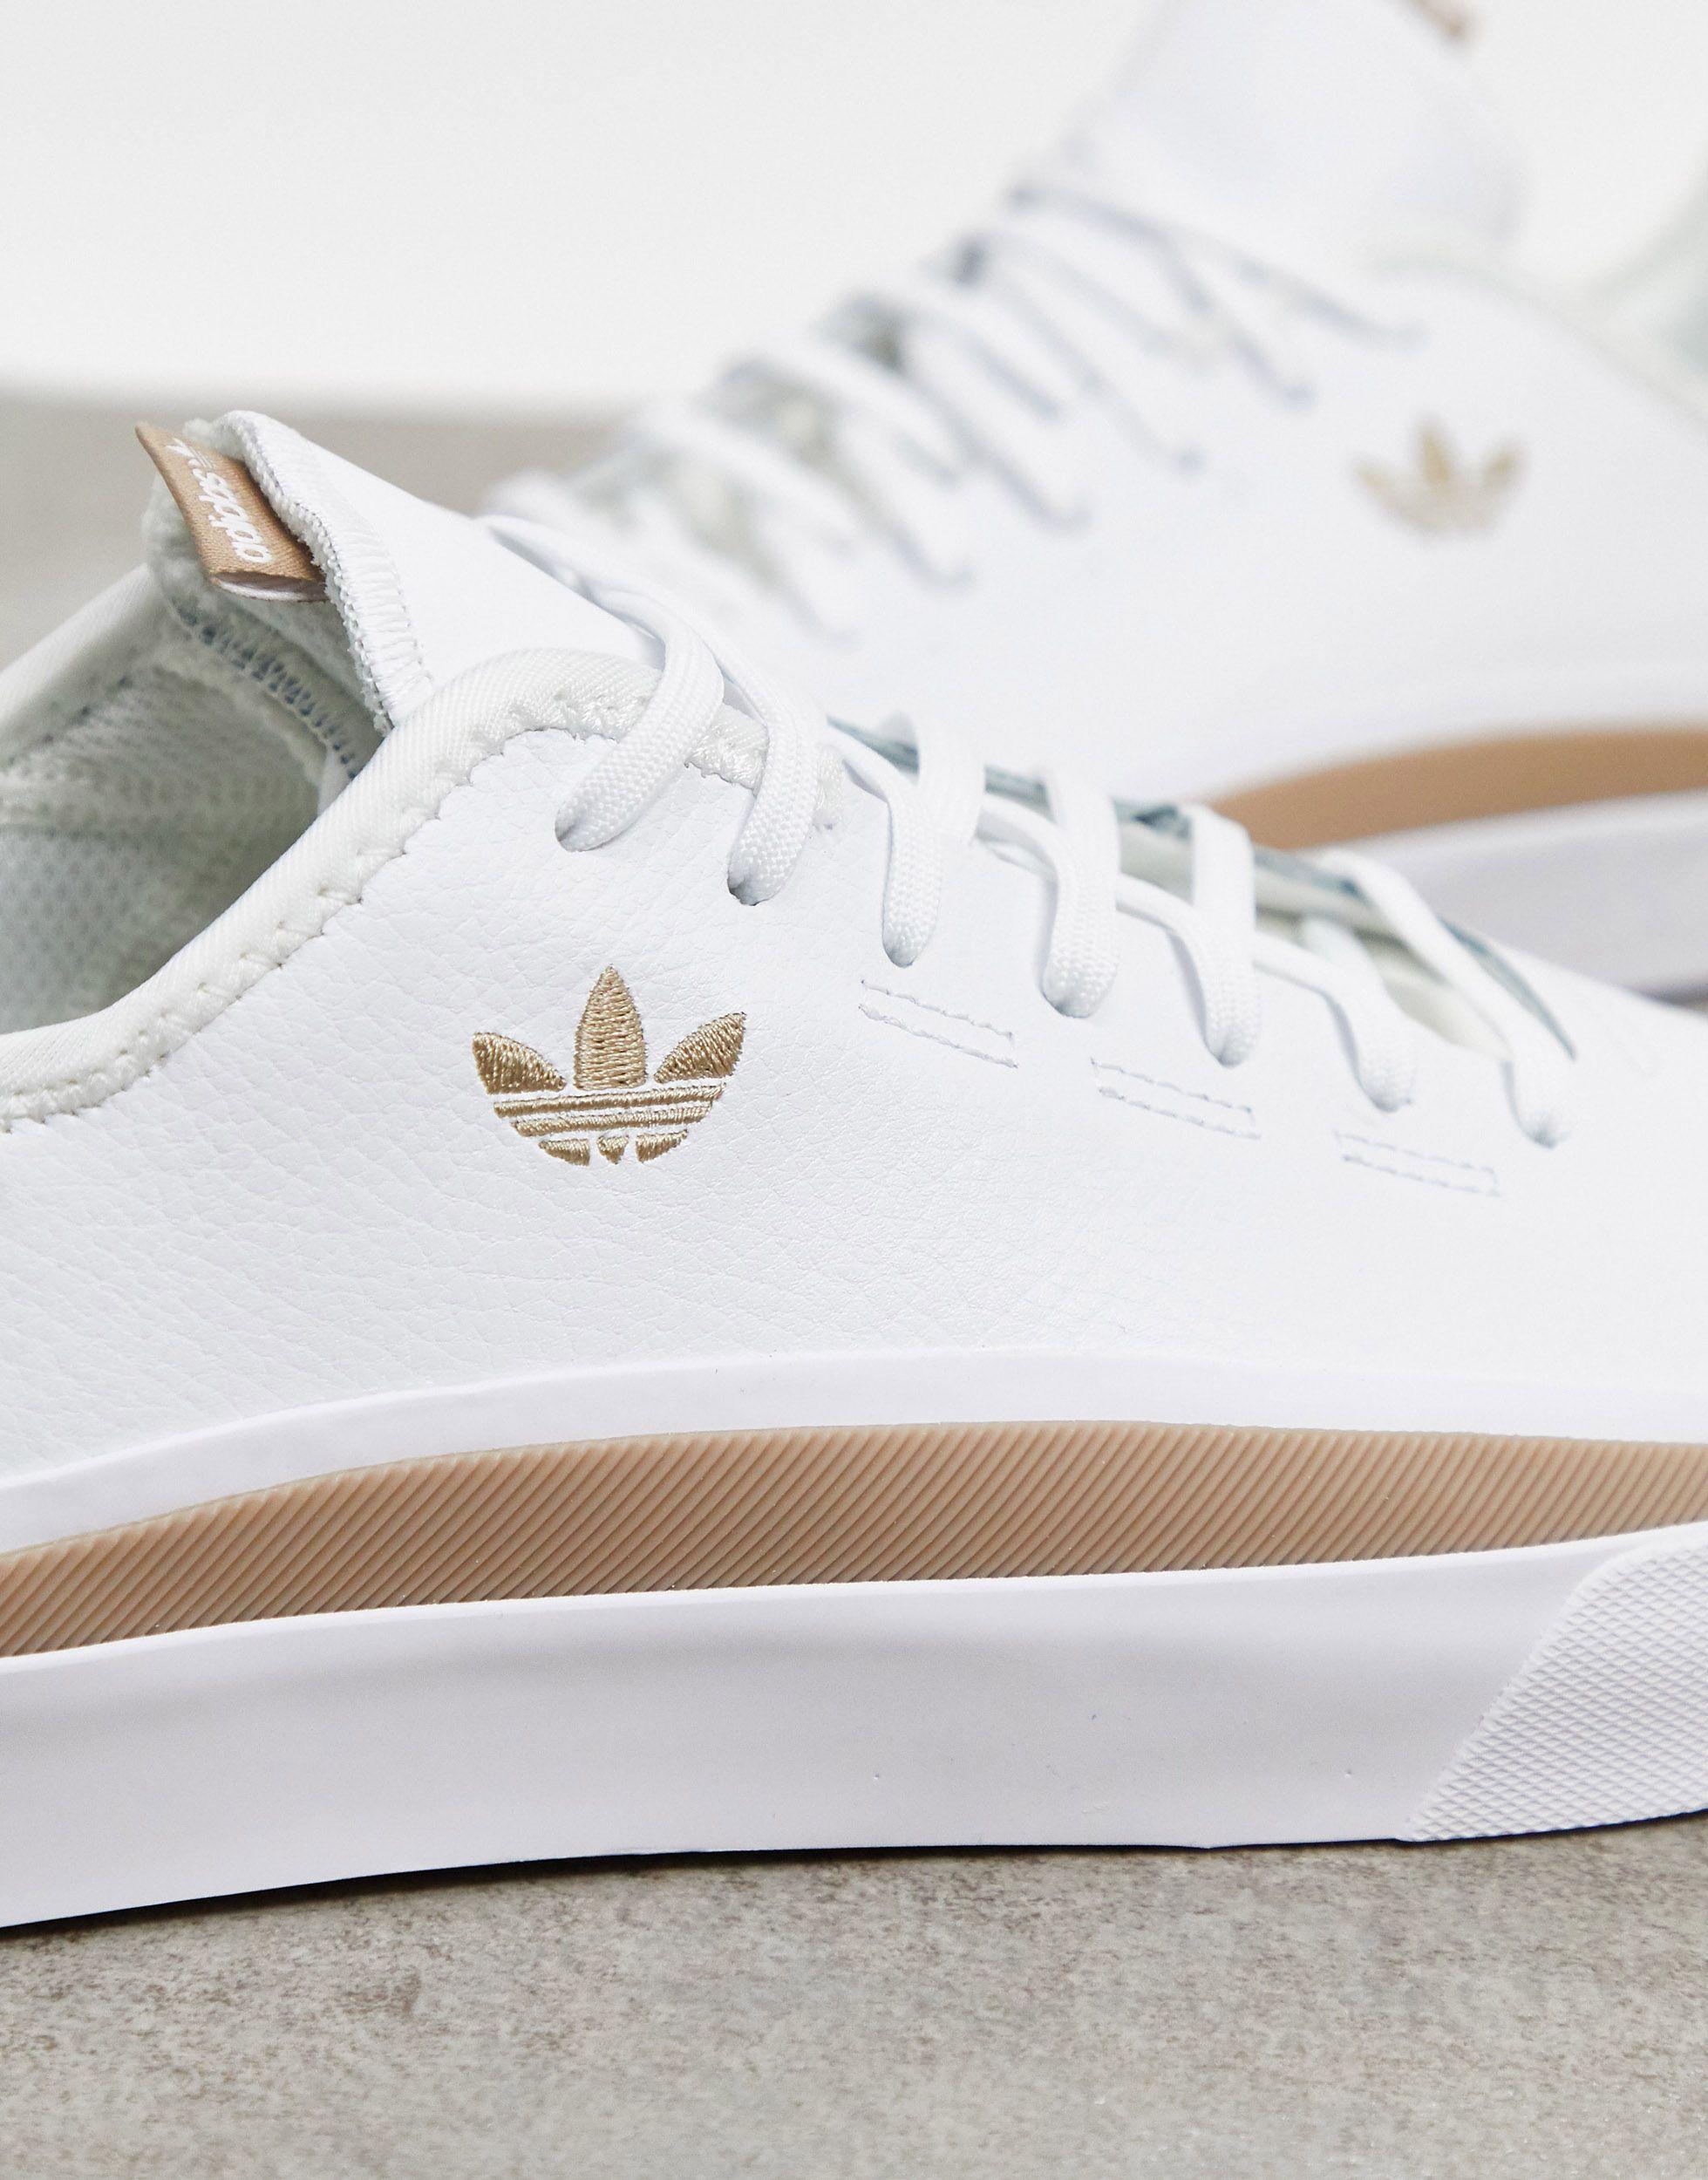 adidas Originals Sabalo Trainers in White for Men | Lyst UK